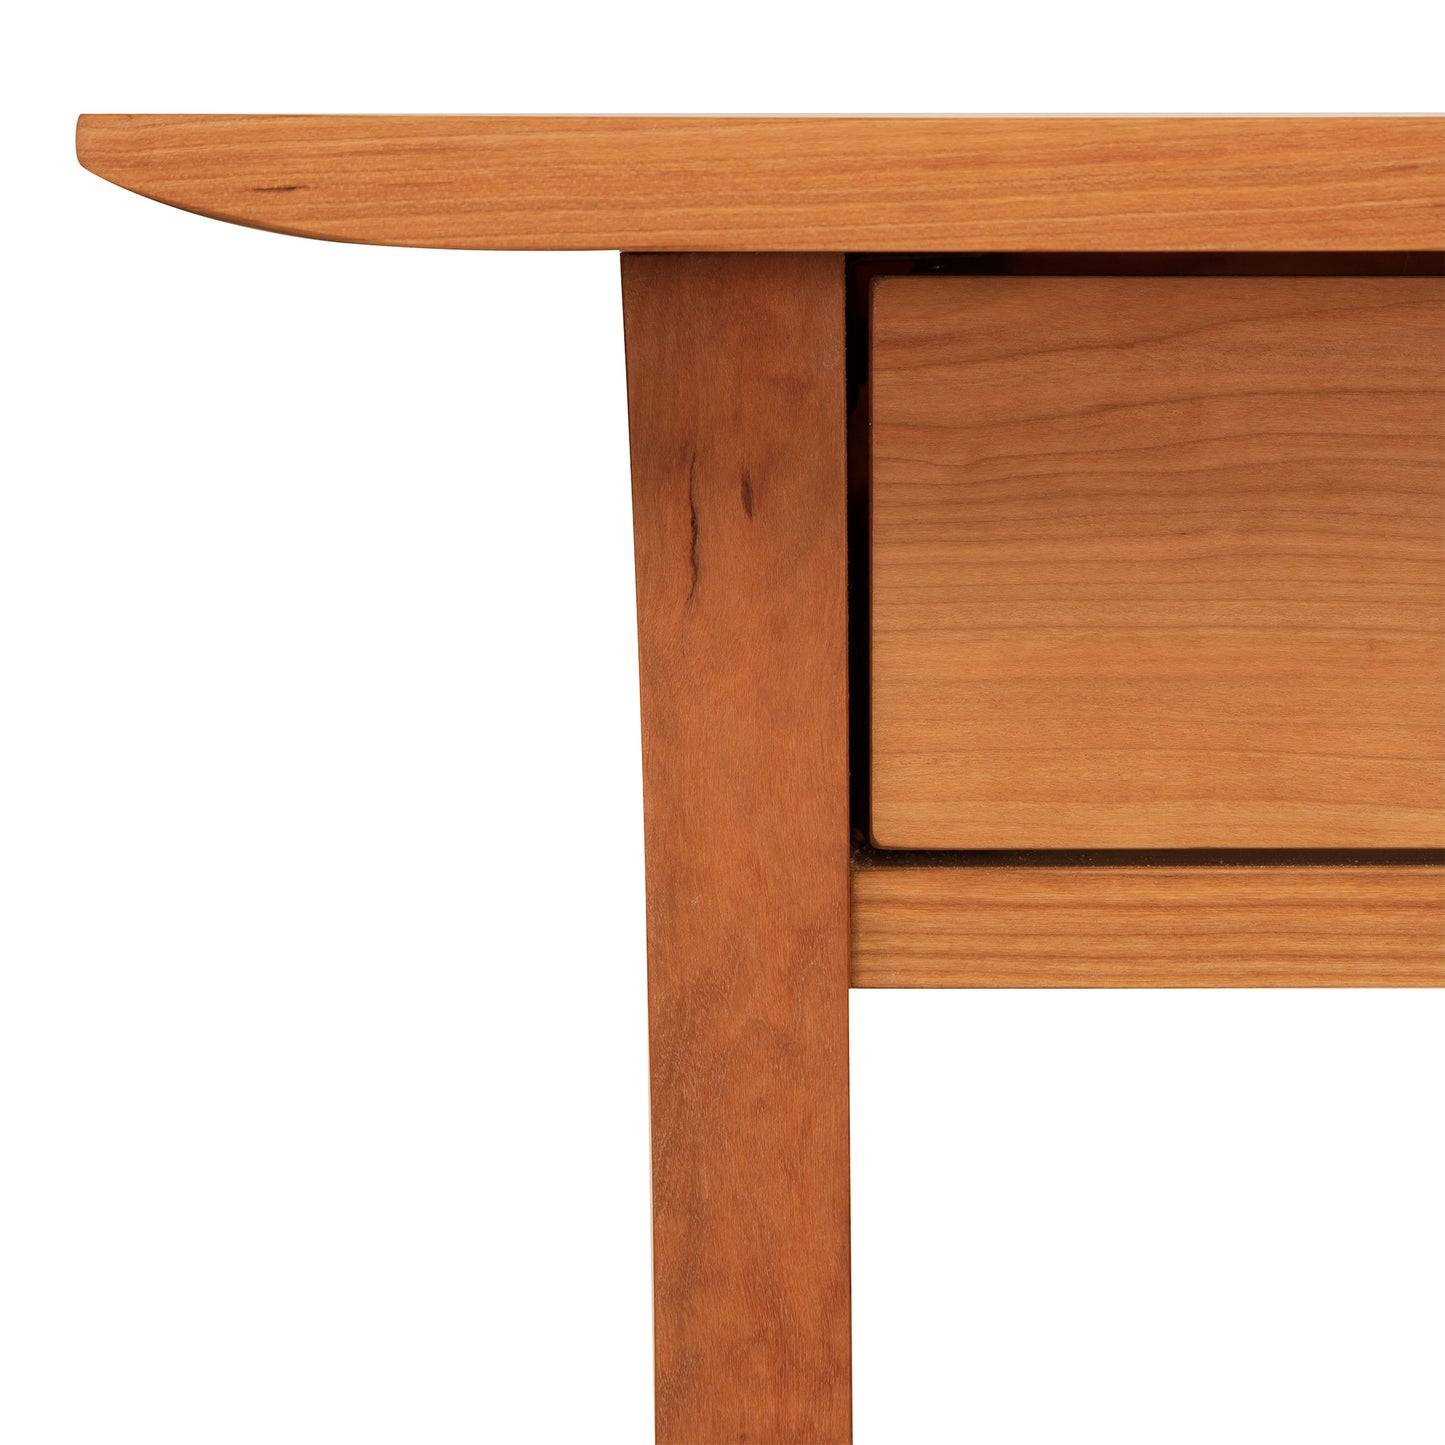 Close-up of a wooden table corner with Arts and Crafts styling, showcasing the wood grain and joinery details against a white background for the Vermont Furniture Designs' Contemporary Craftsman Writing Desk.